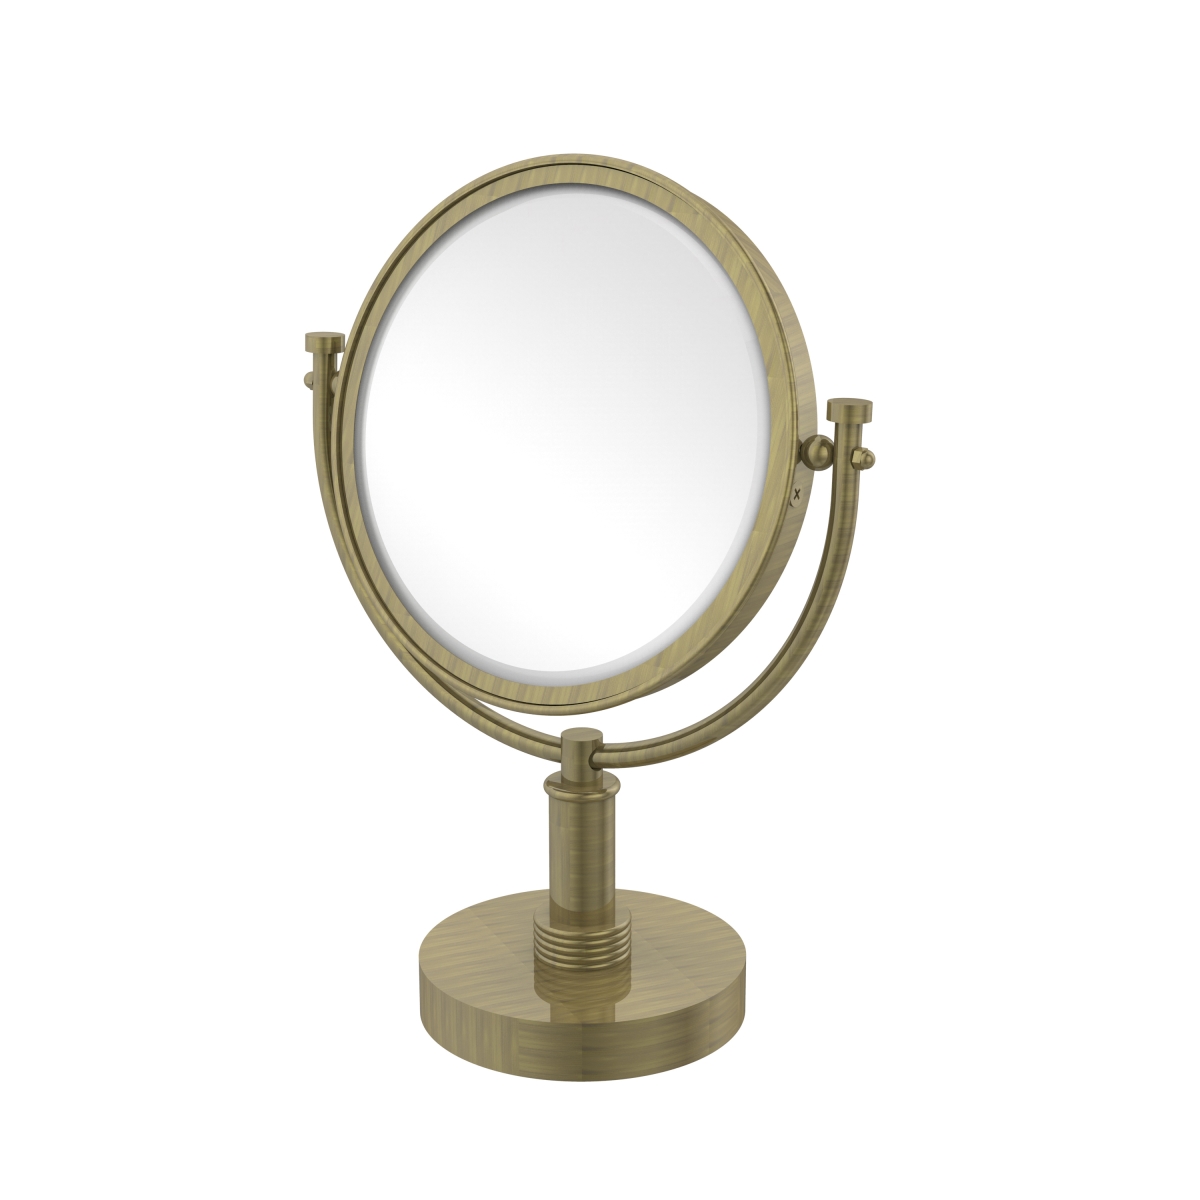 Picture of Allied Brass DM-4G-2X-ABR 8 in. Vanity Top Make-Up Mirror 2X Magnification, Antique Brass - 15 x 8 x 8 in.